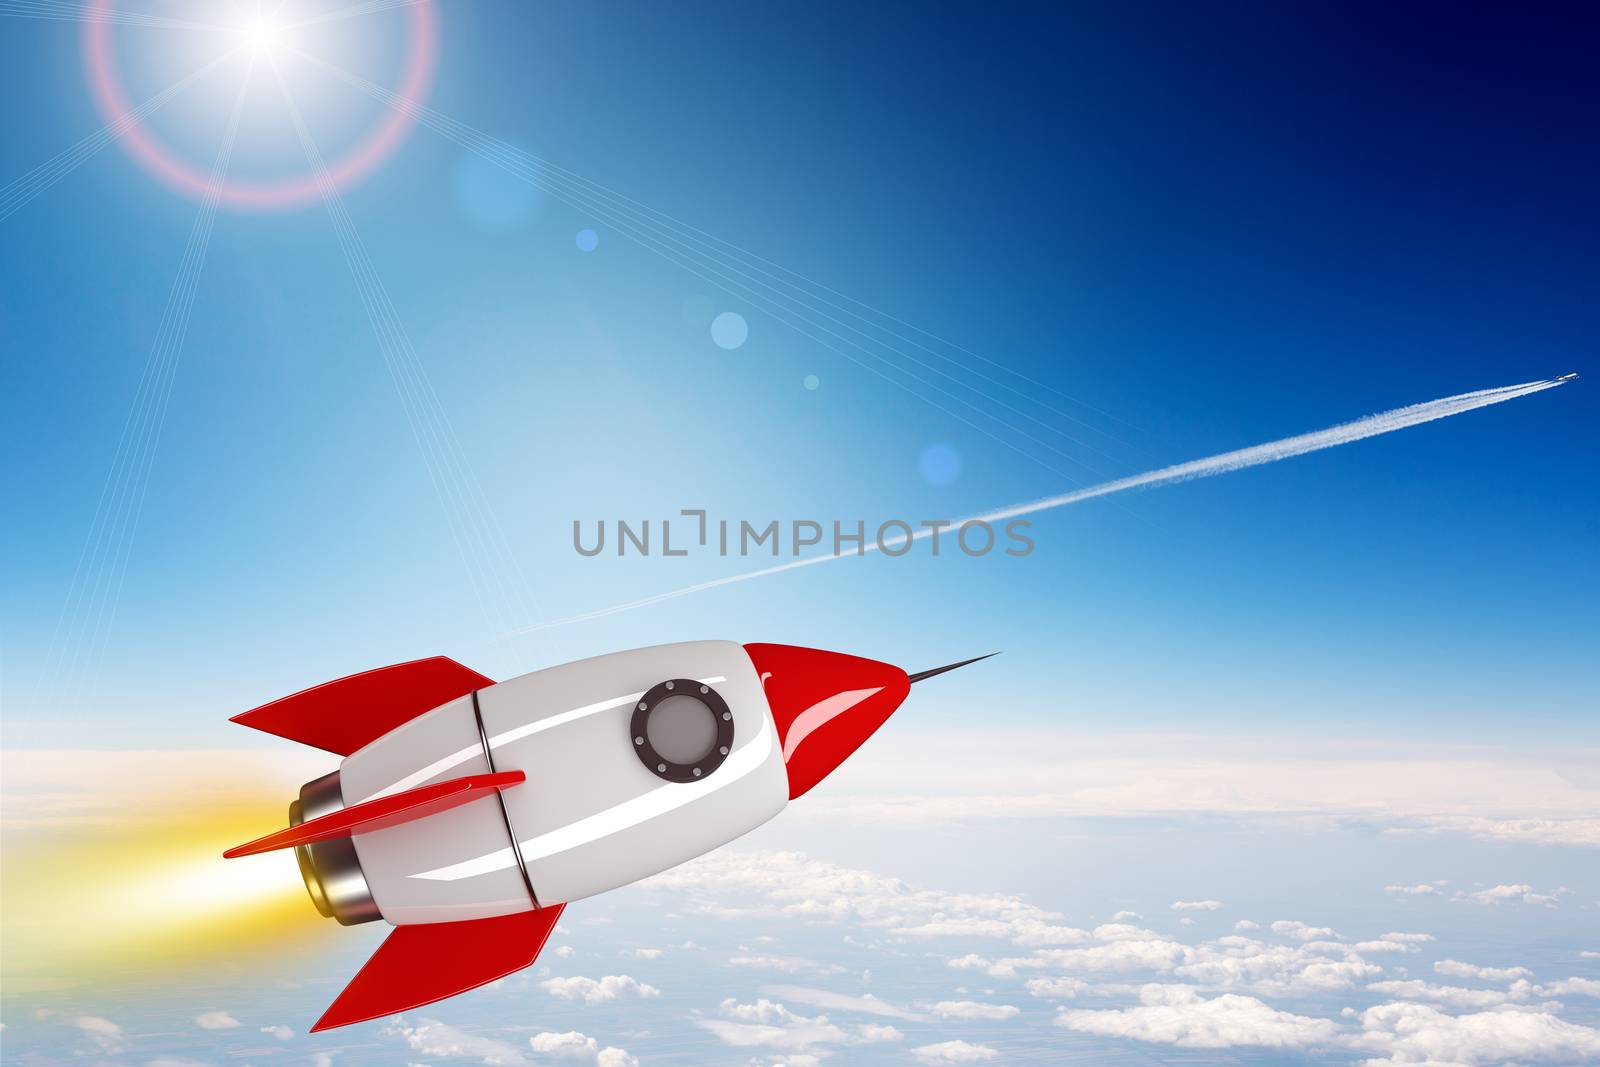 Rocket in space with clouds and blue sky